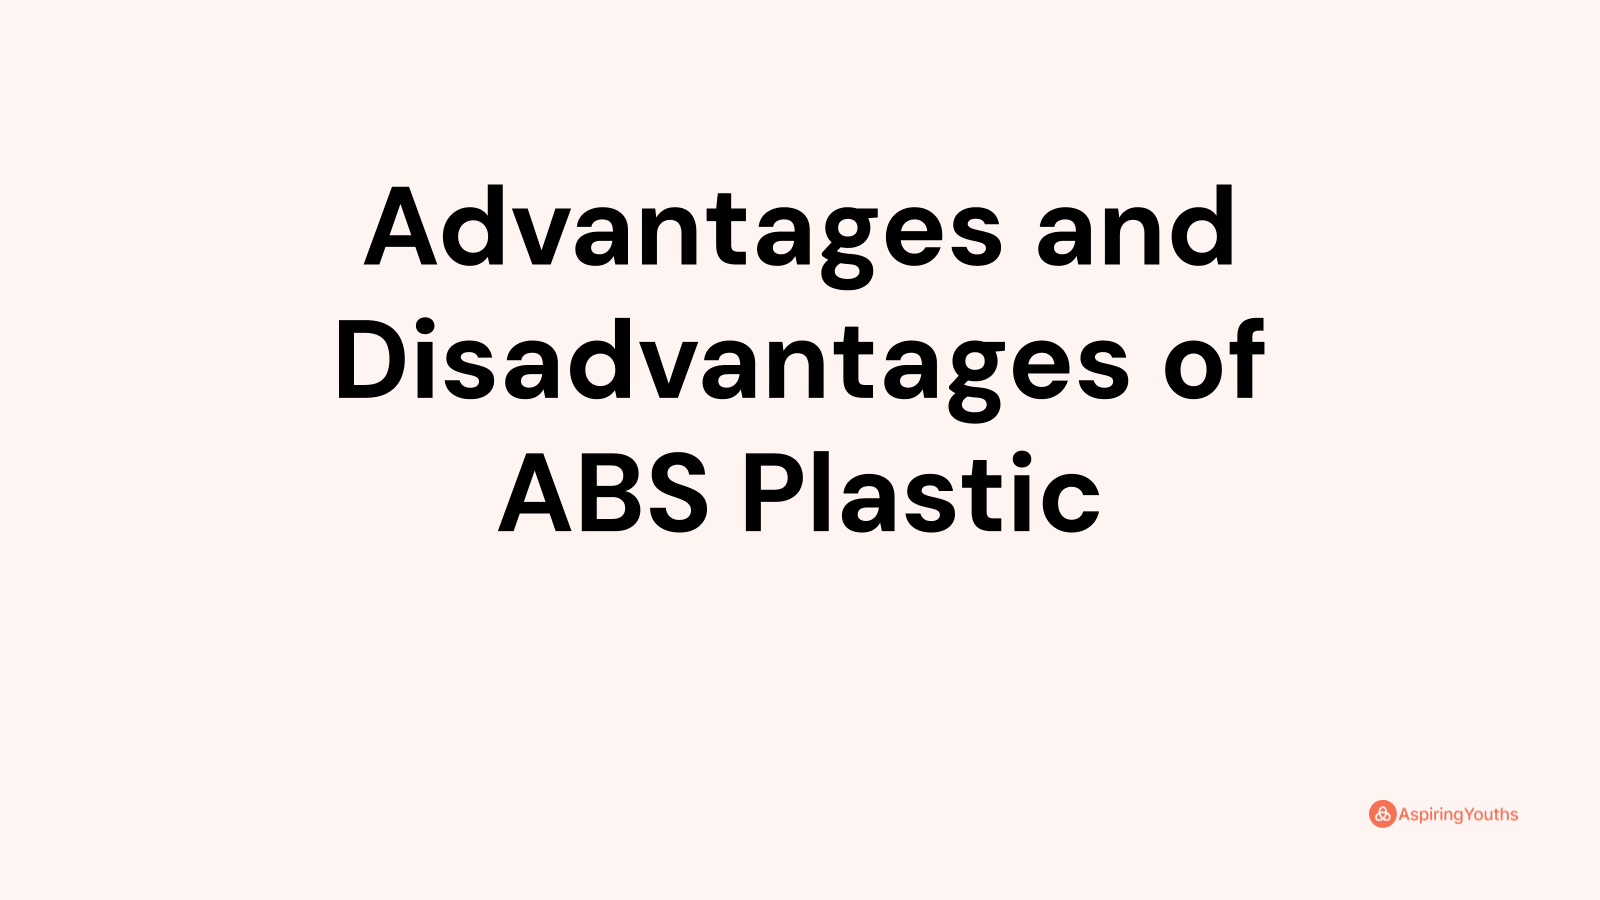 Advantages and disadvantages of ABS Plastic